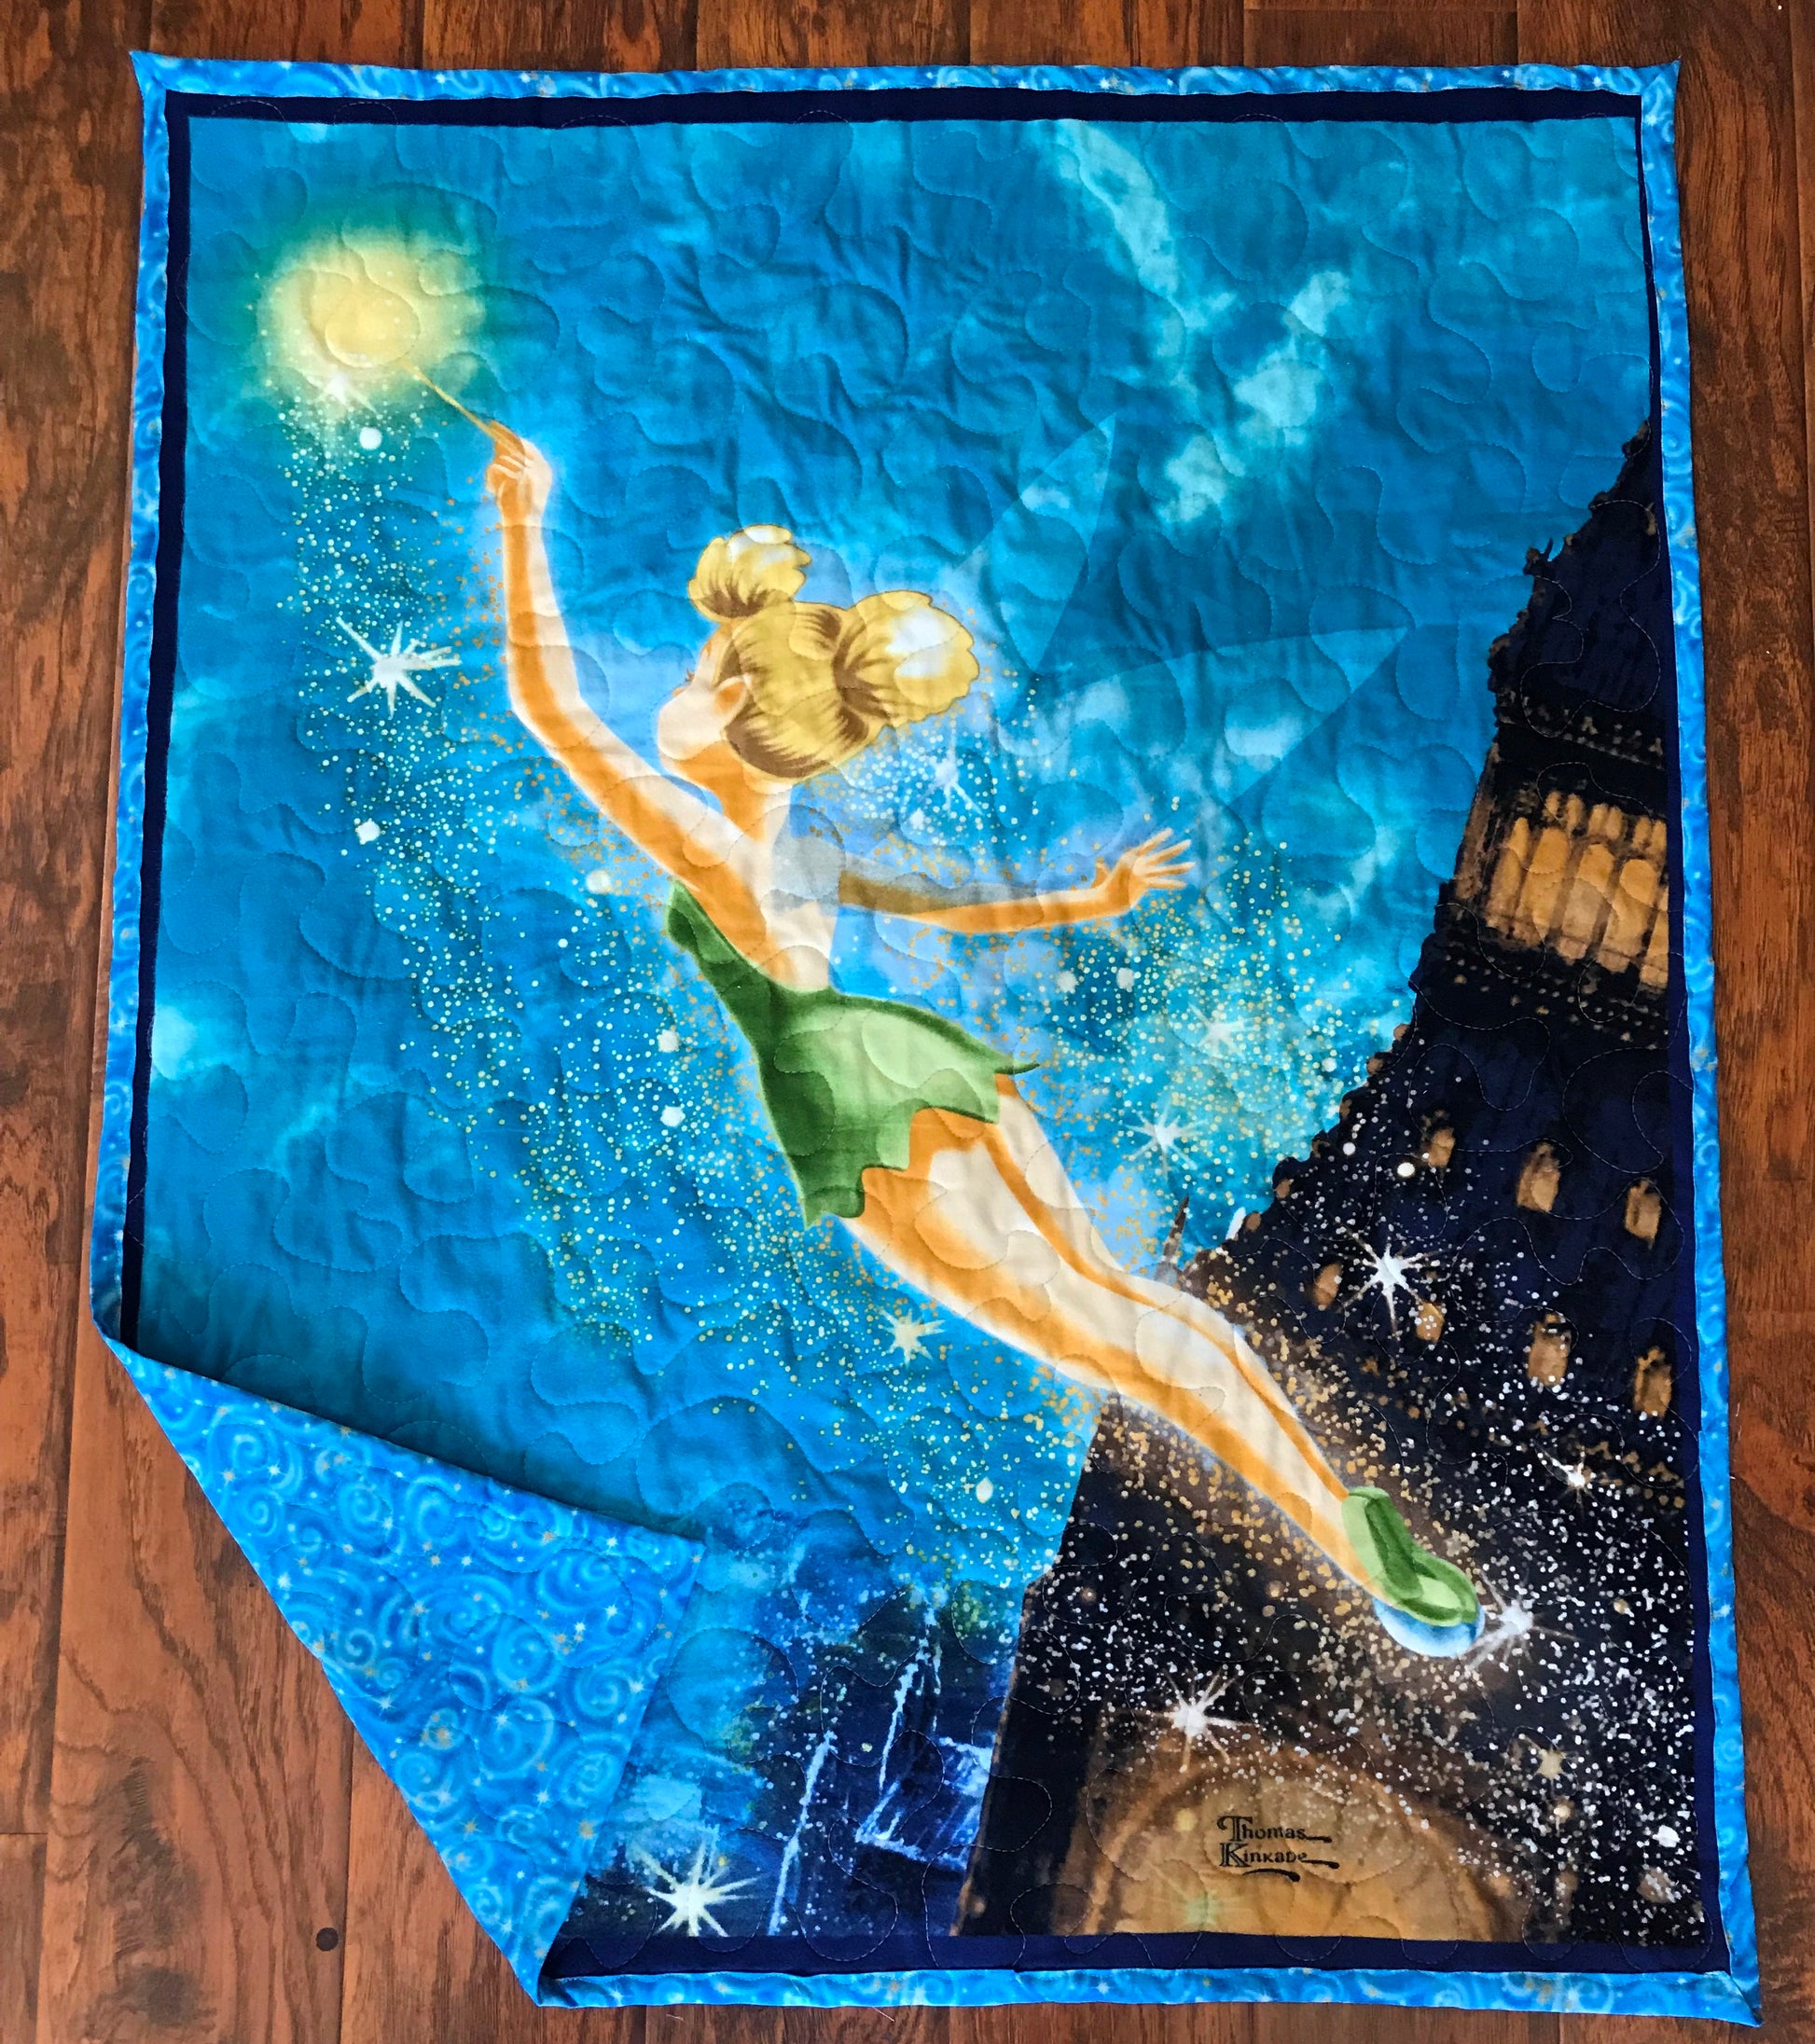 PETER PAN'S TINKER BELL "FLY TO NEVERLAND" Flannel Front Quilted Blanket 36"X44" nursery to adult lap blanket